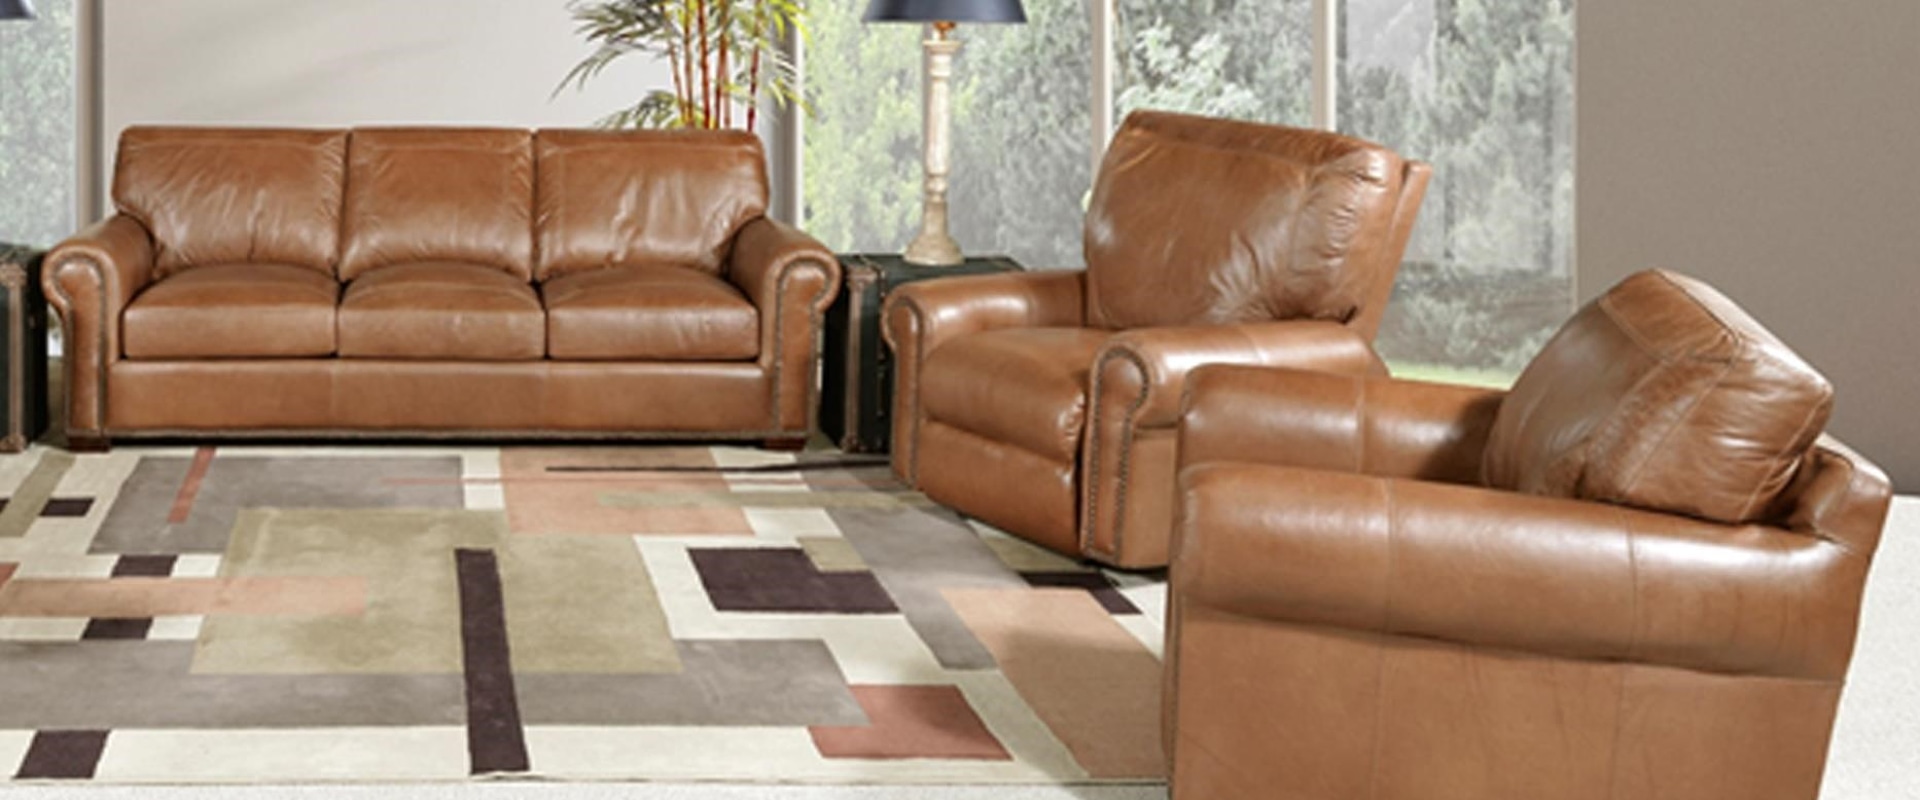 Saddle Leather Sofa and Leather Chair Set